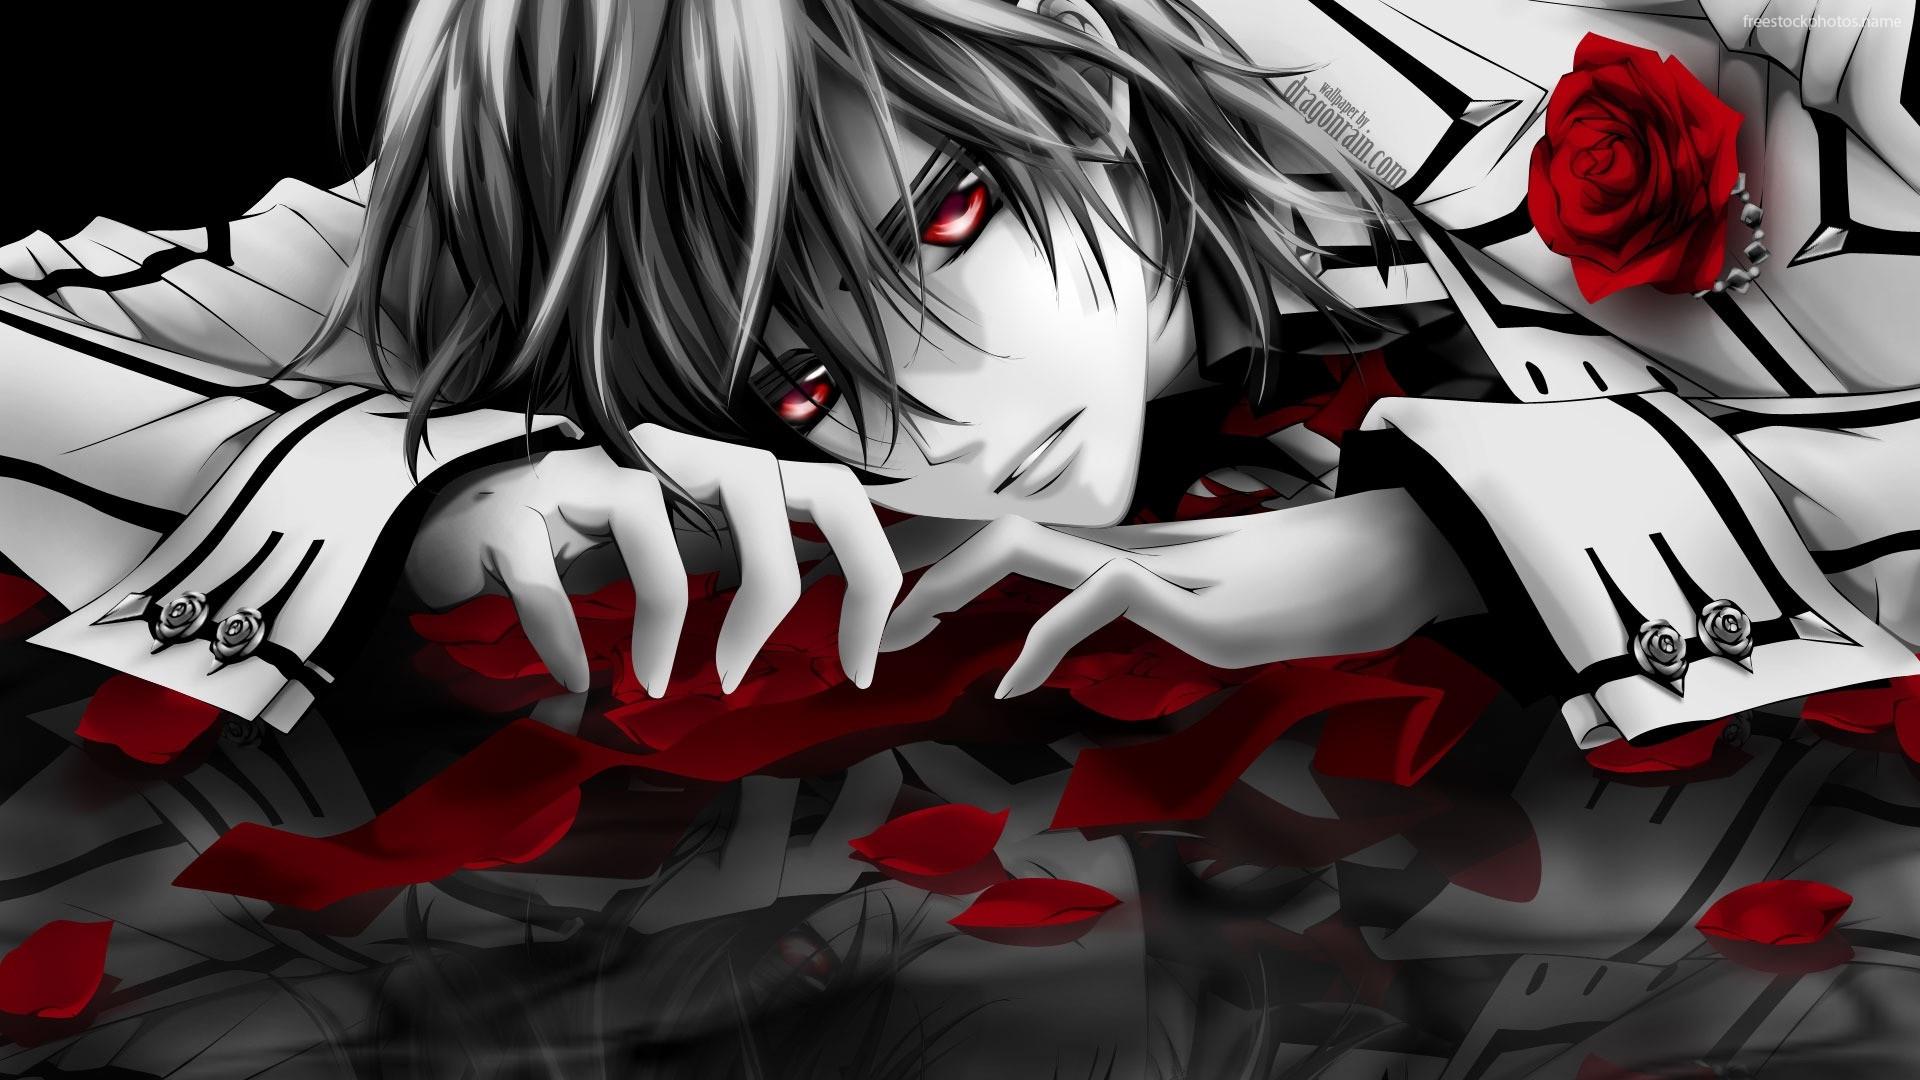 Depressed Anime Boy Wallpapers - Wallpaper Cave